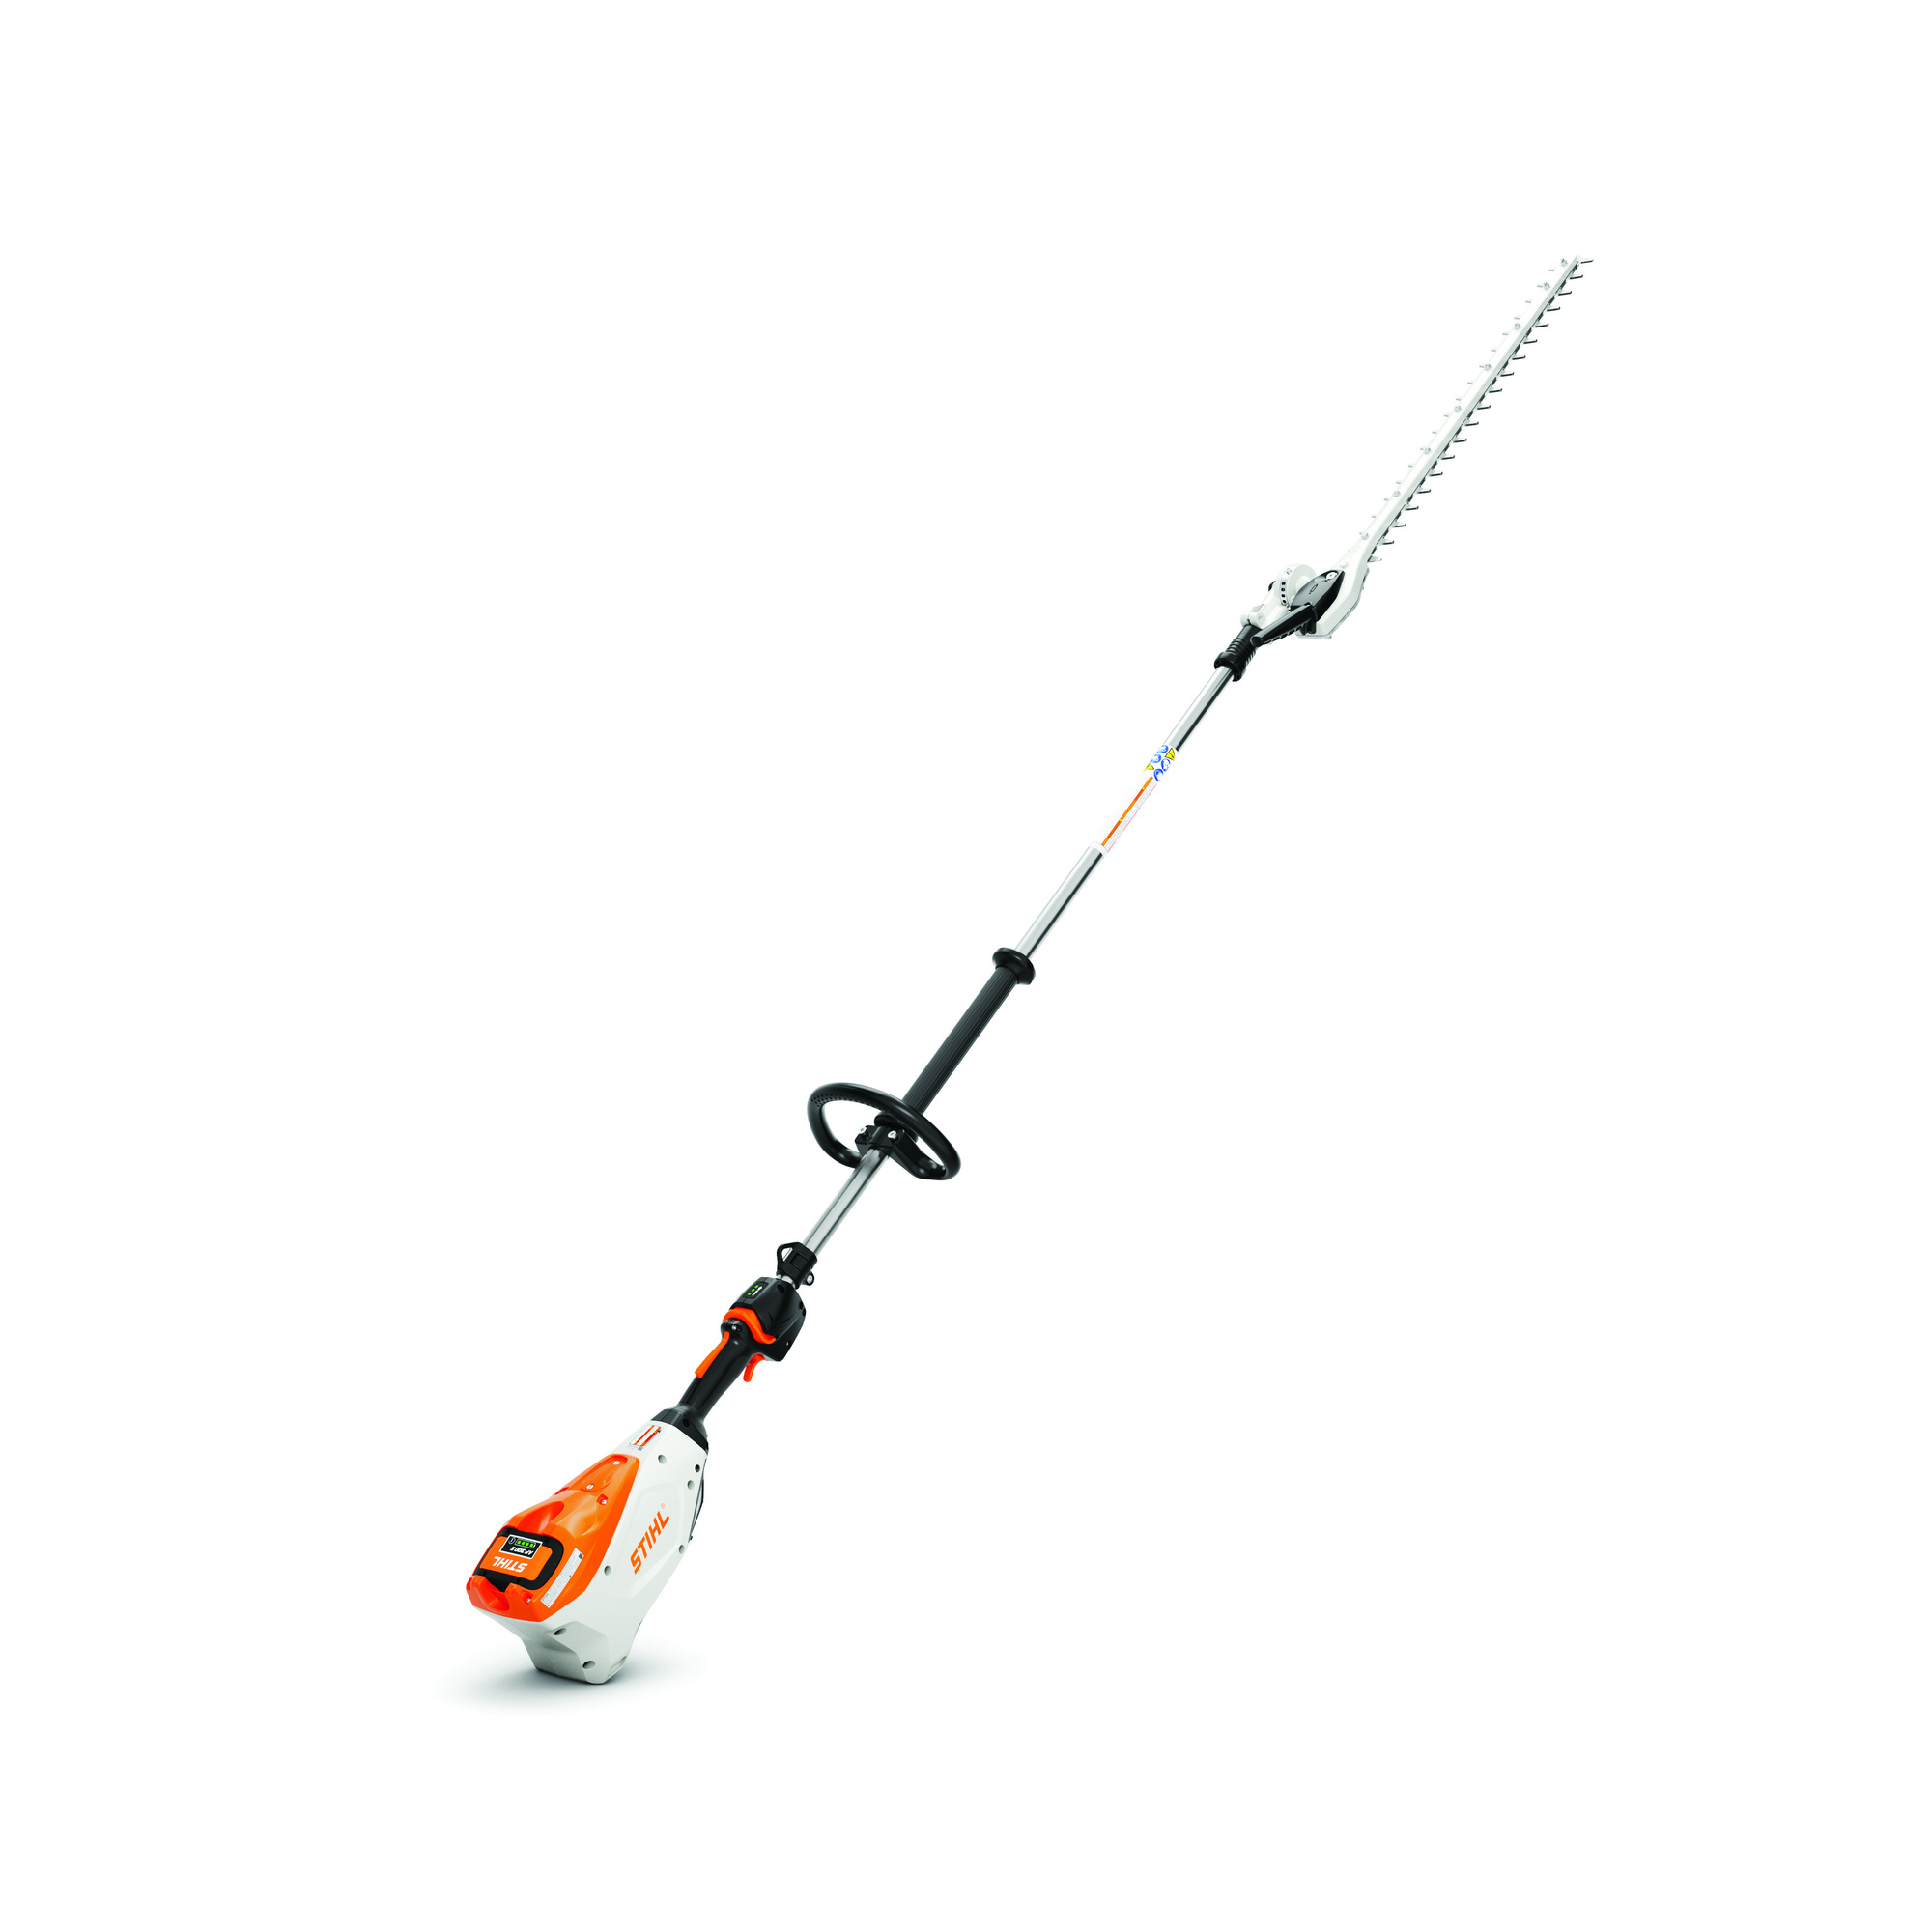 Stihl, AP Series Extended Reach Hedge Trimmer, Blade Length 24 in, Model HLA 135 145